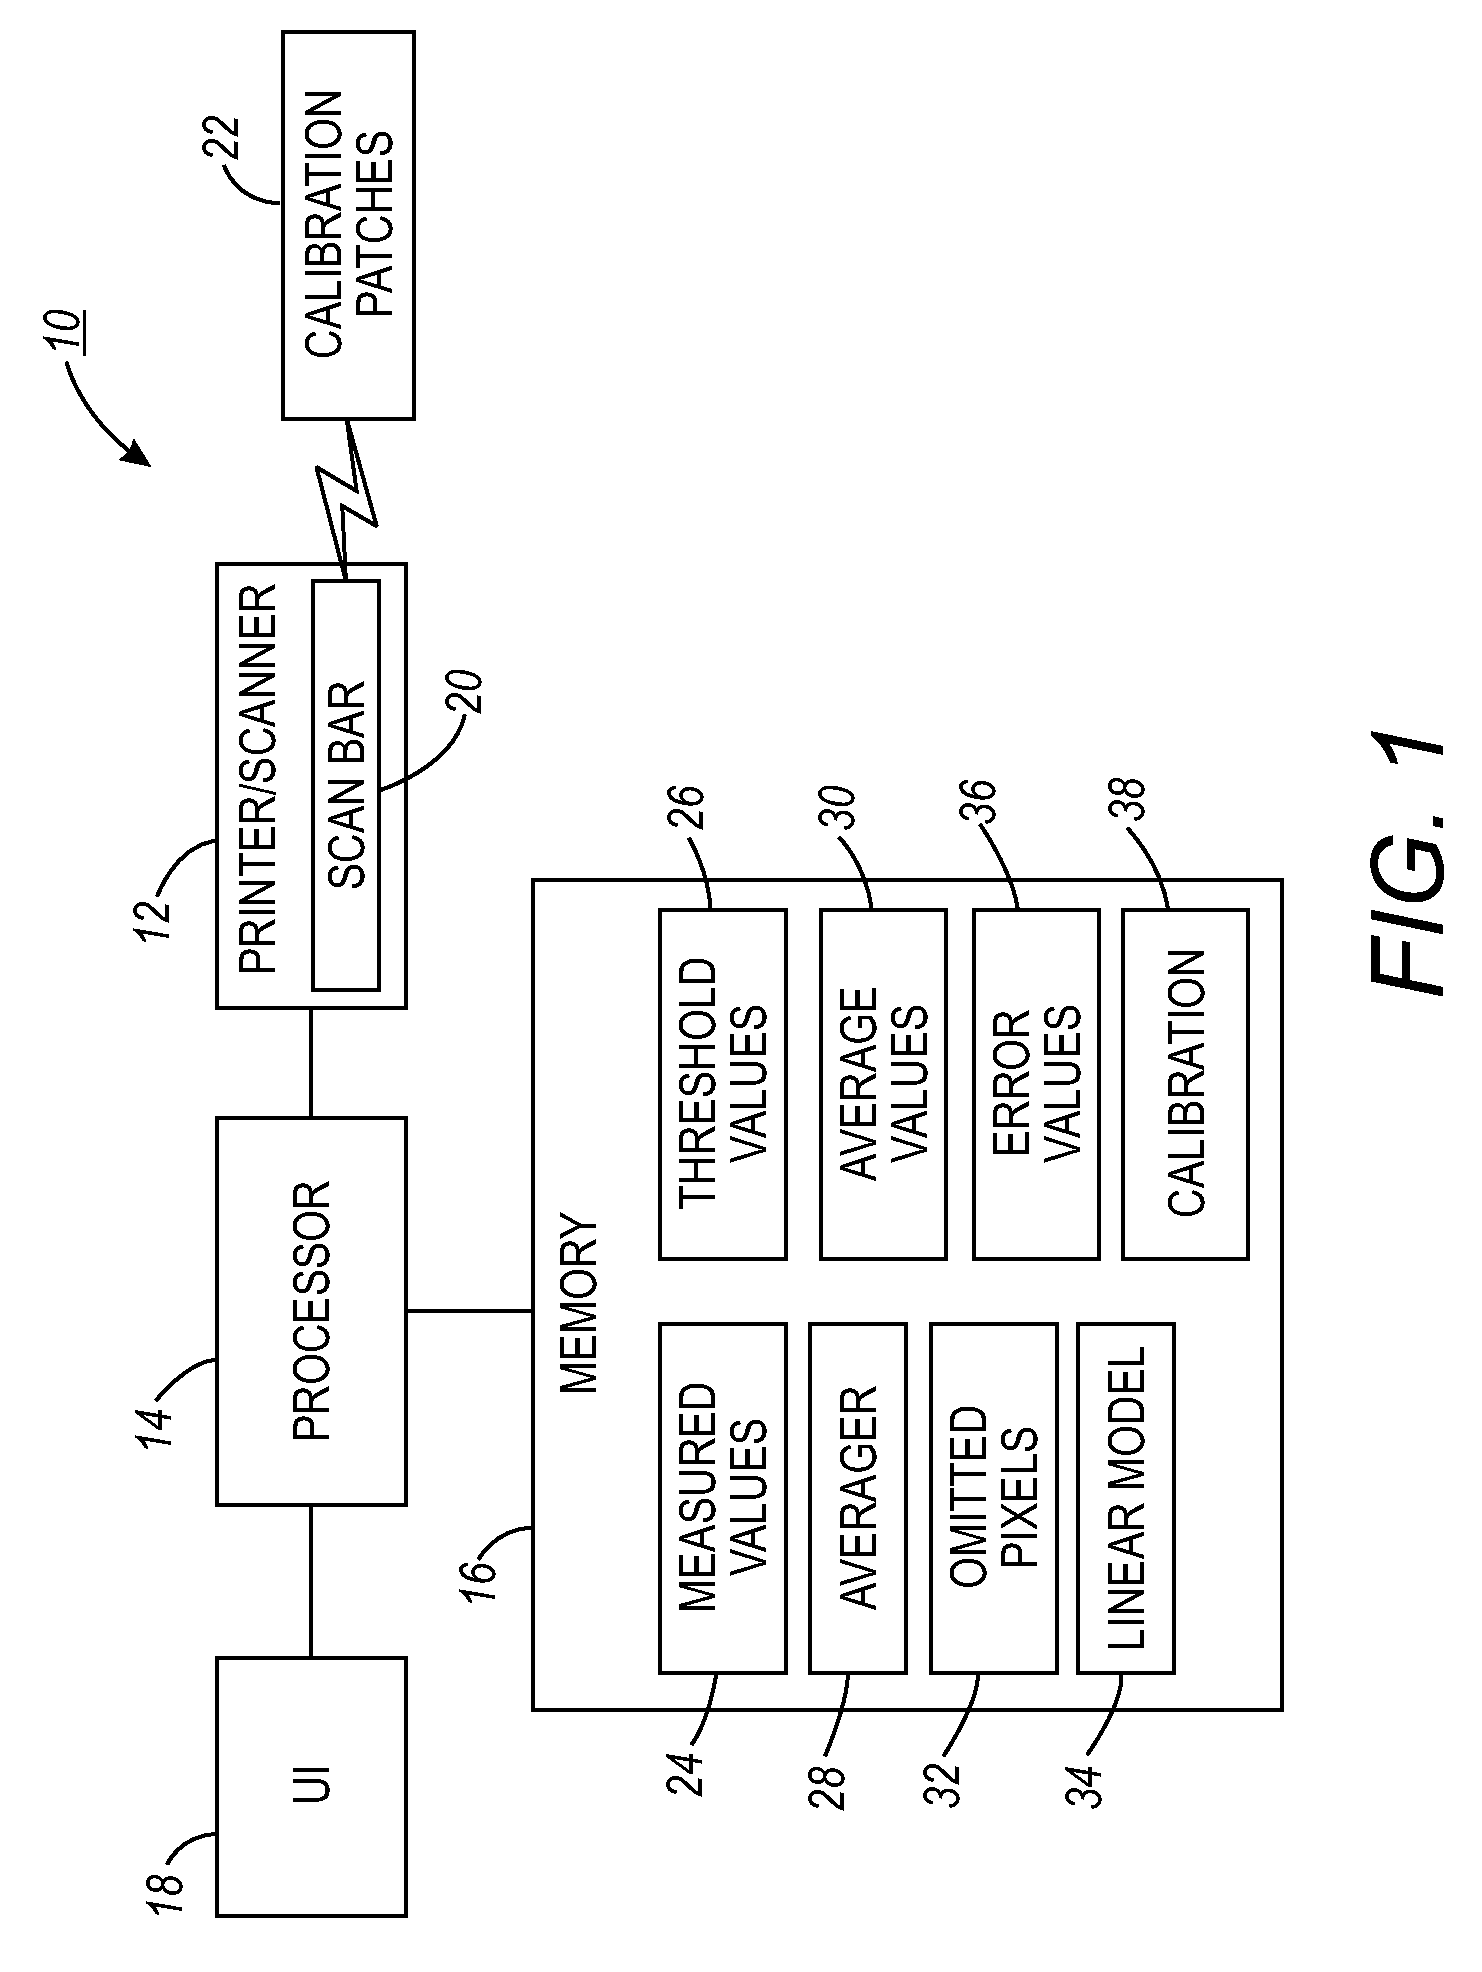 Method of compensating for clipping in input scanners